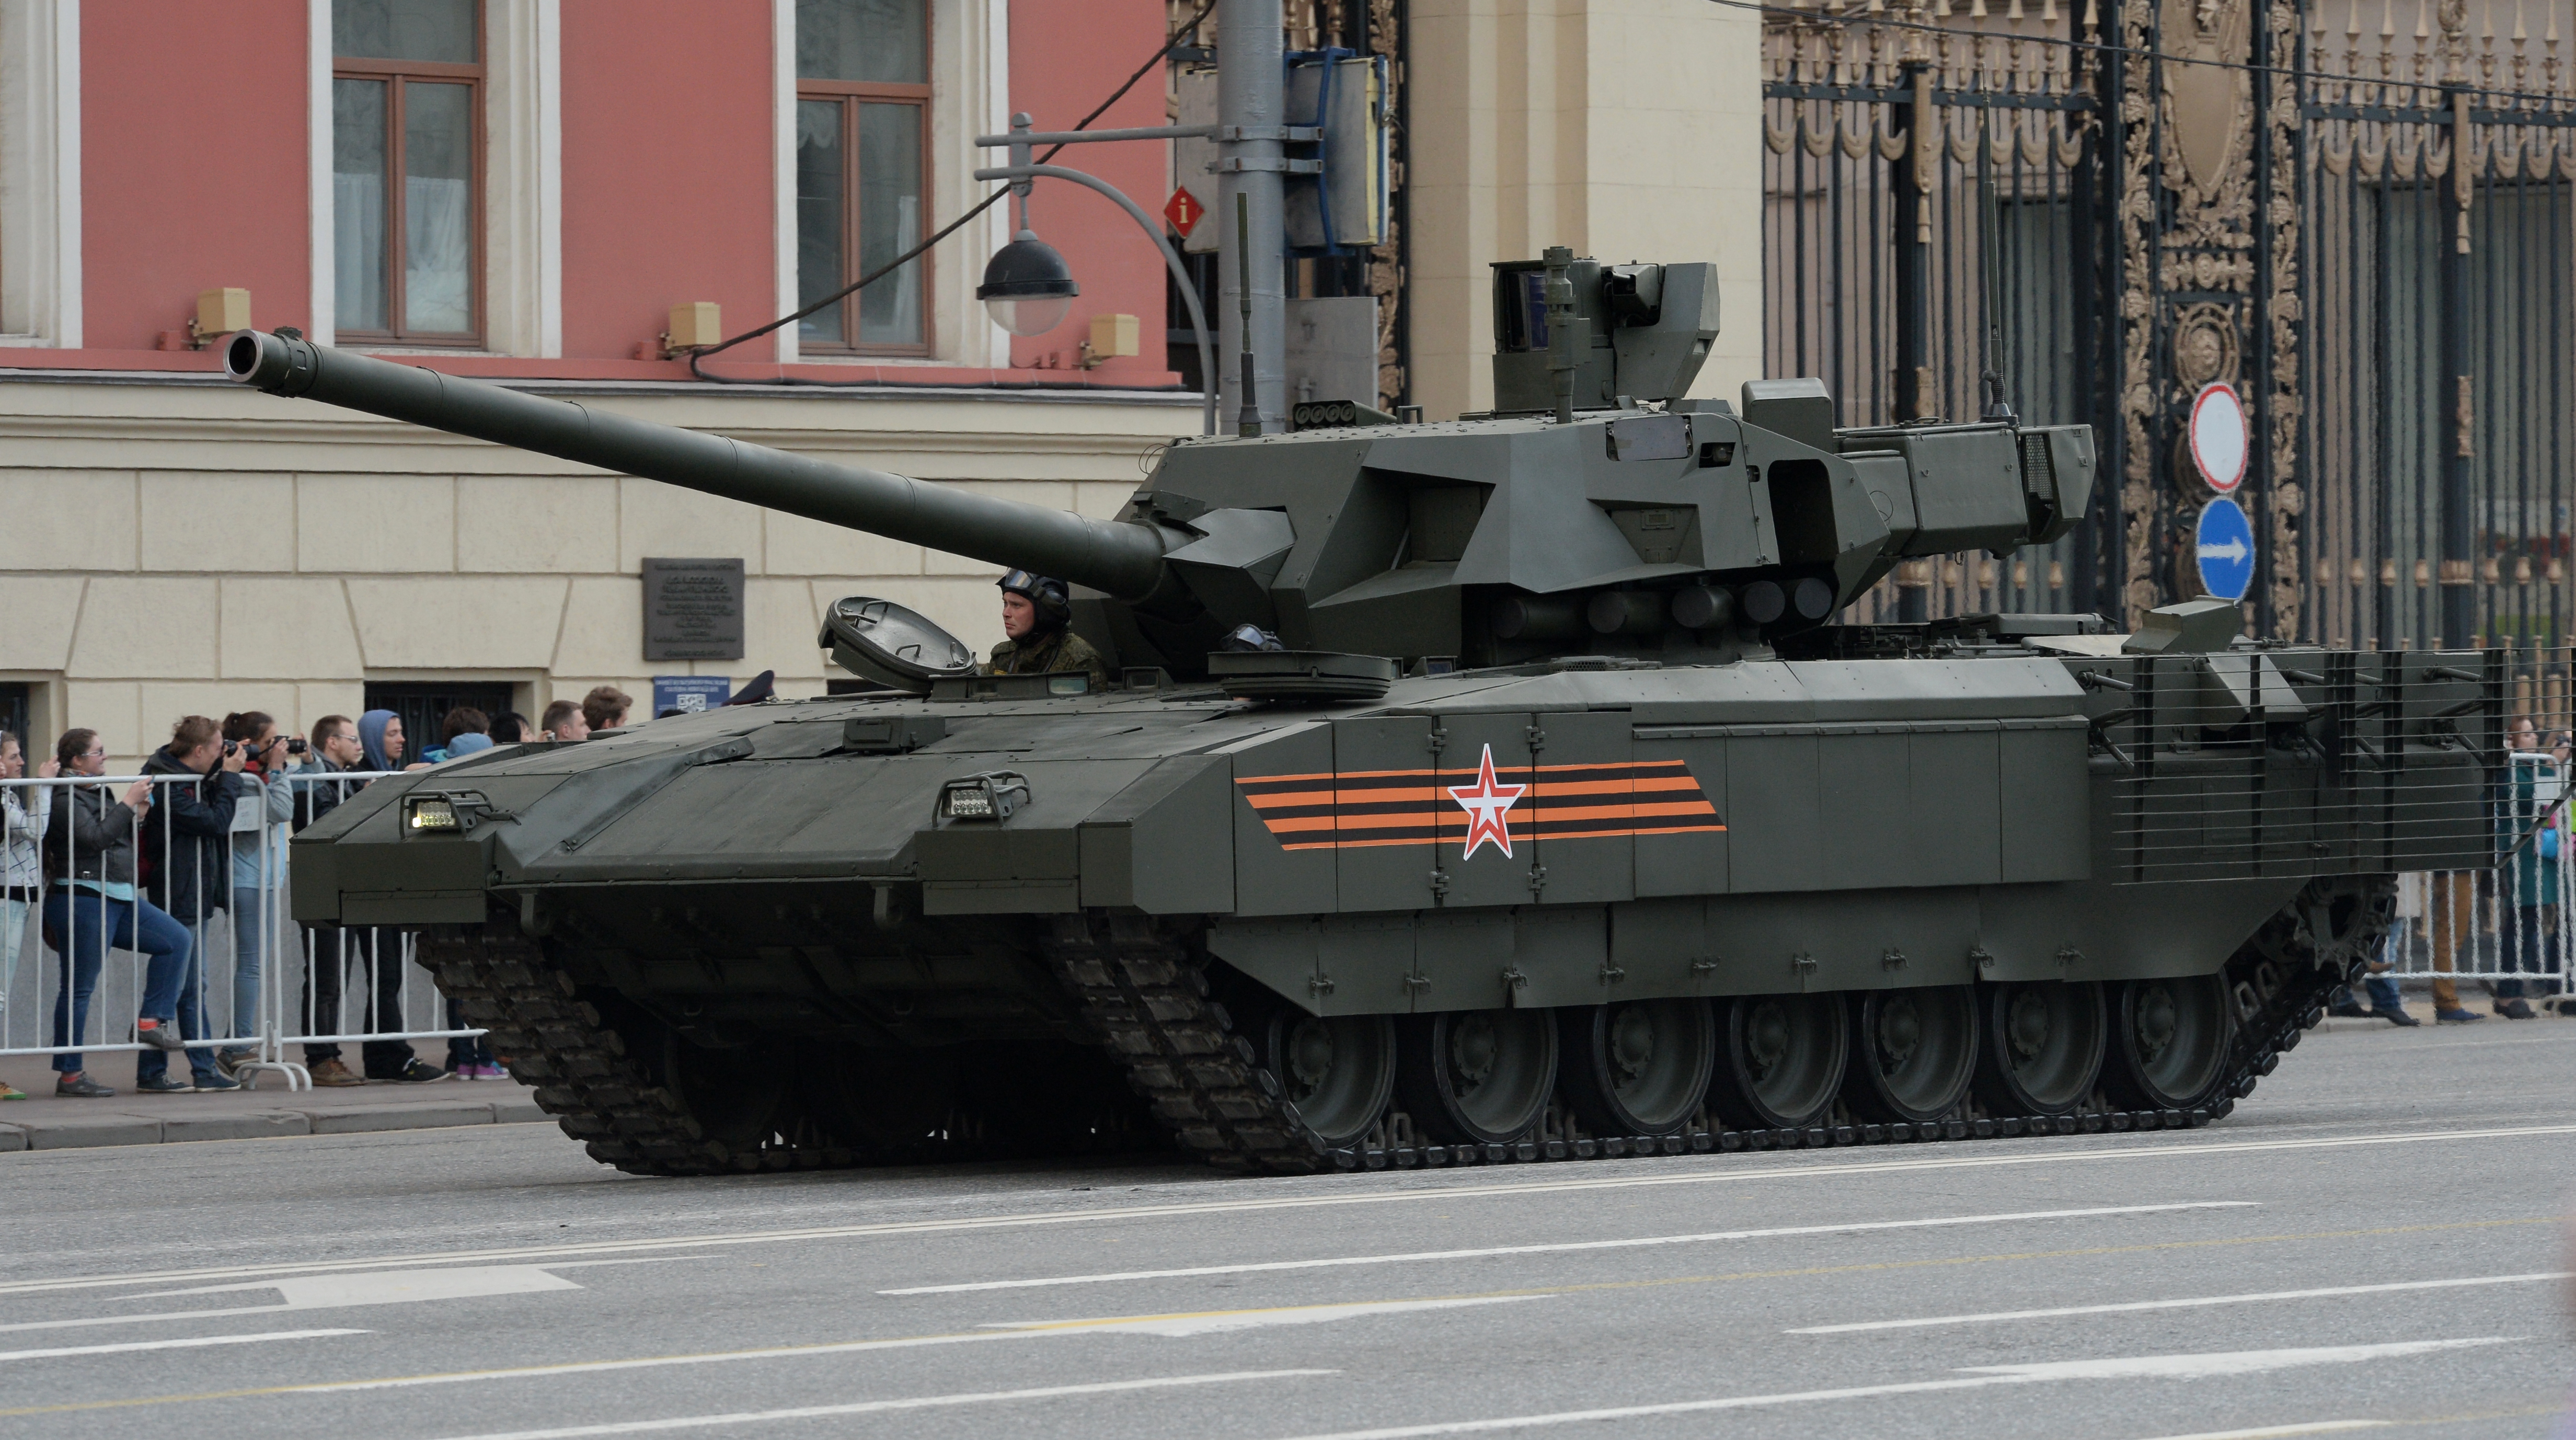 Russia unveiled the T-14 Armata tank at a Victory Day parade in May